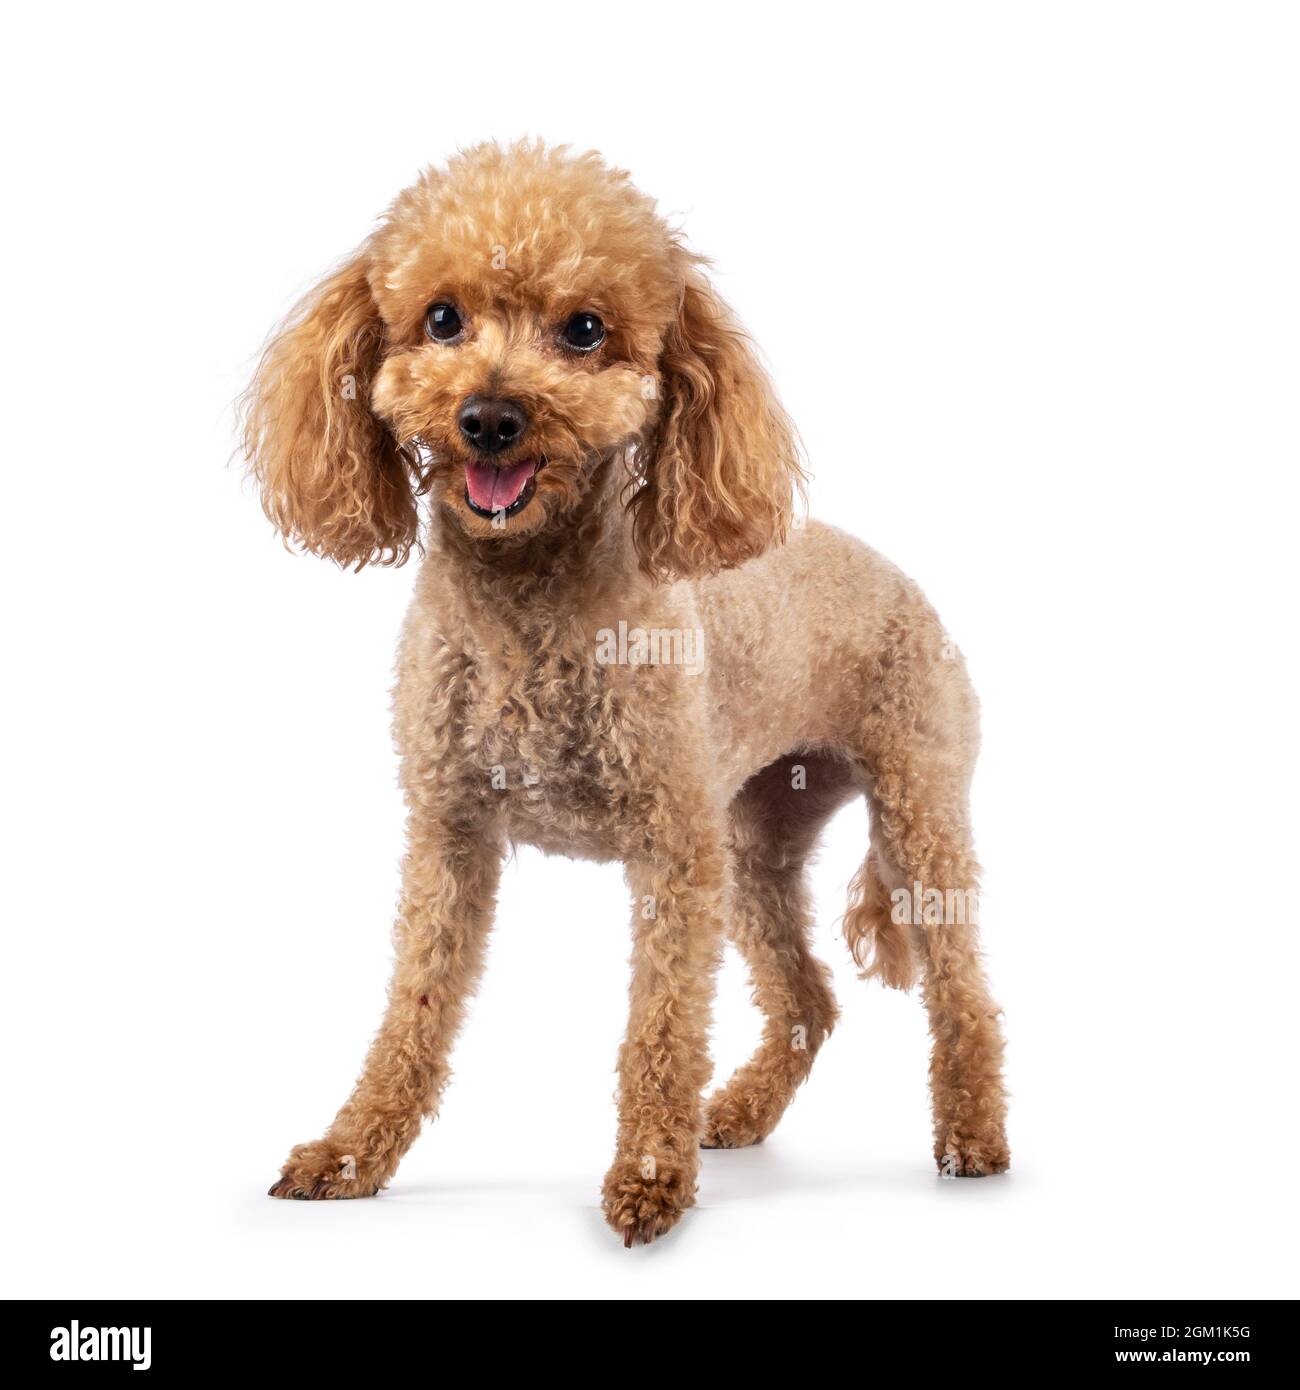 Adorable young adult apricot brown toy or miniature poodle. Recently groomed. Standing facing camera with mouth open showing tongue. Isolated on a whi Stock Photo